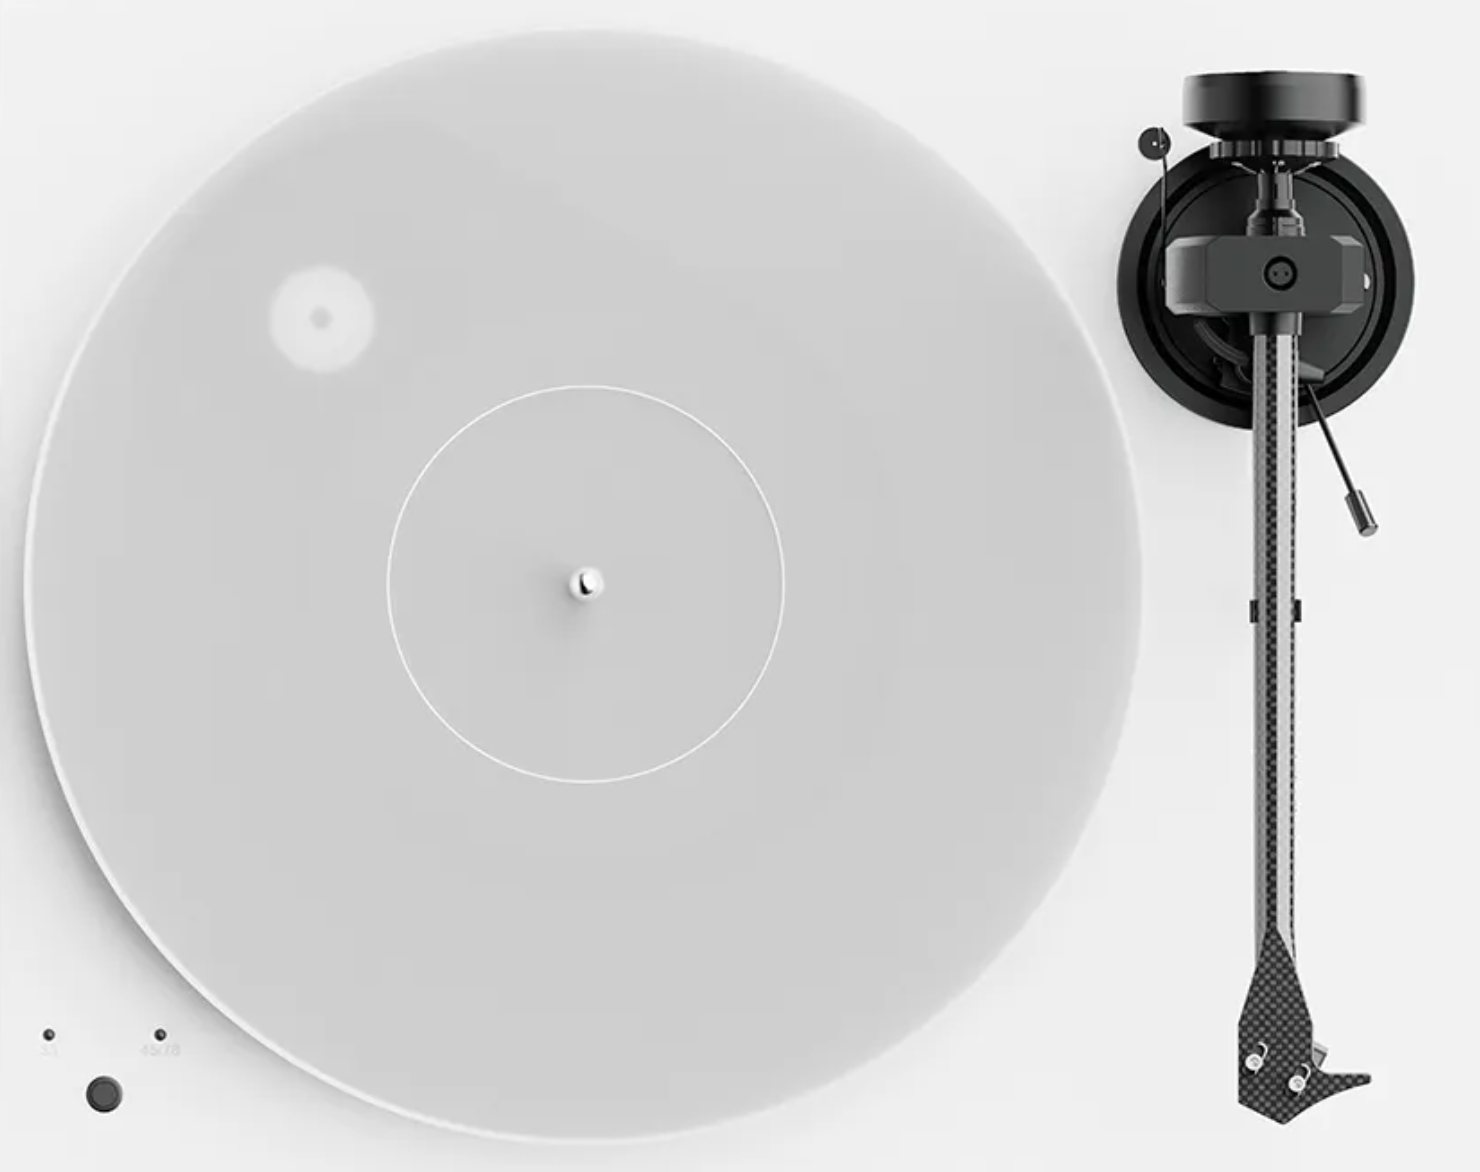 Pro-Ject X1 B Turntable with Pick It PRO Balanced Pre-Fitted image shows platter and tonearm